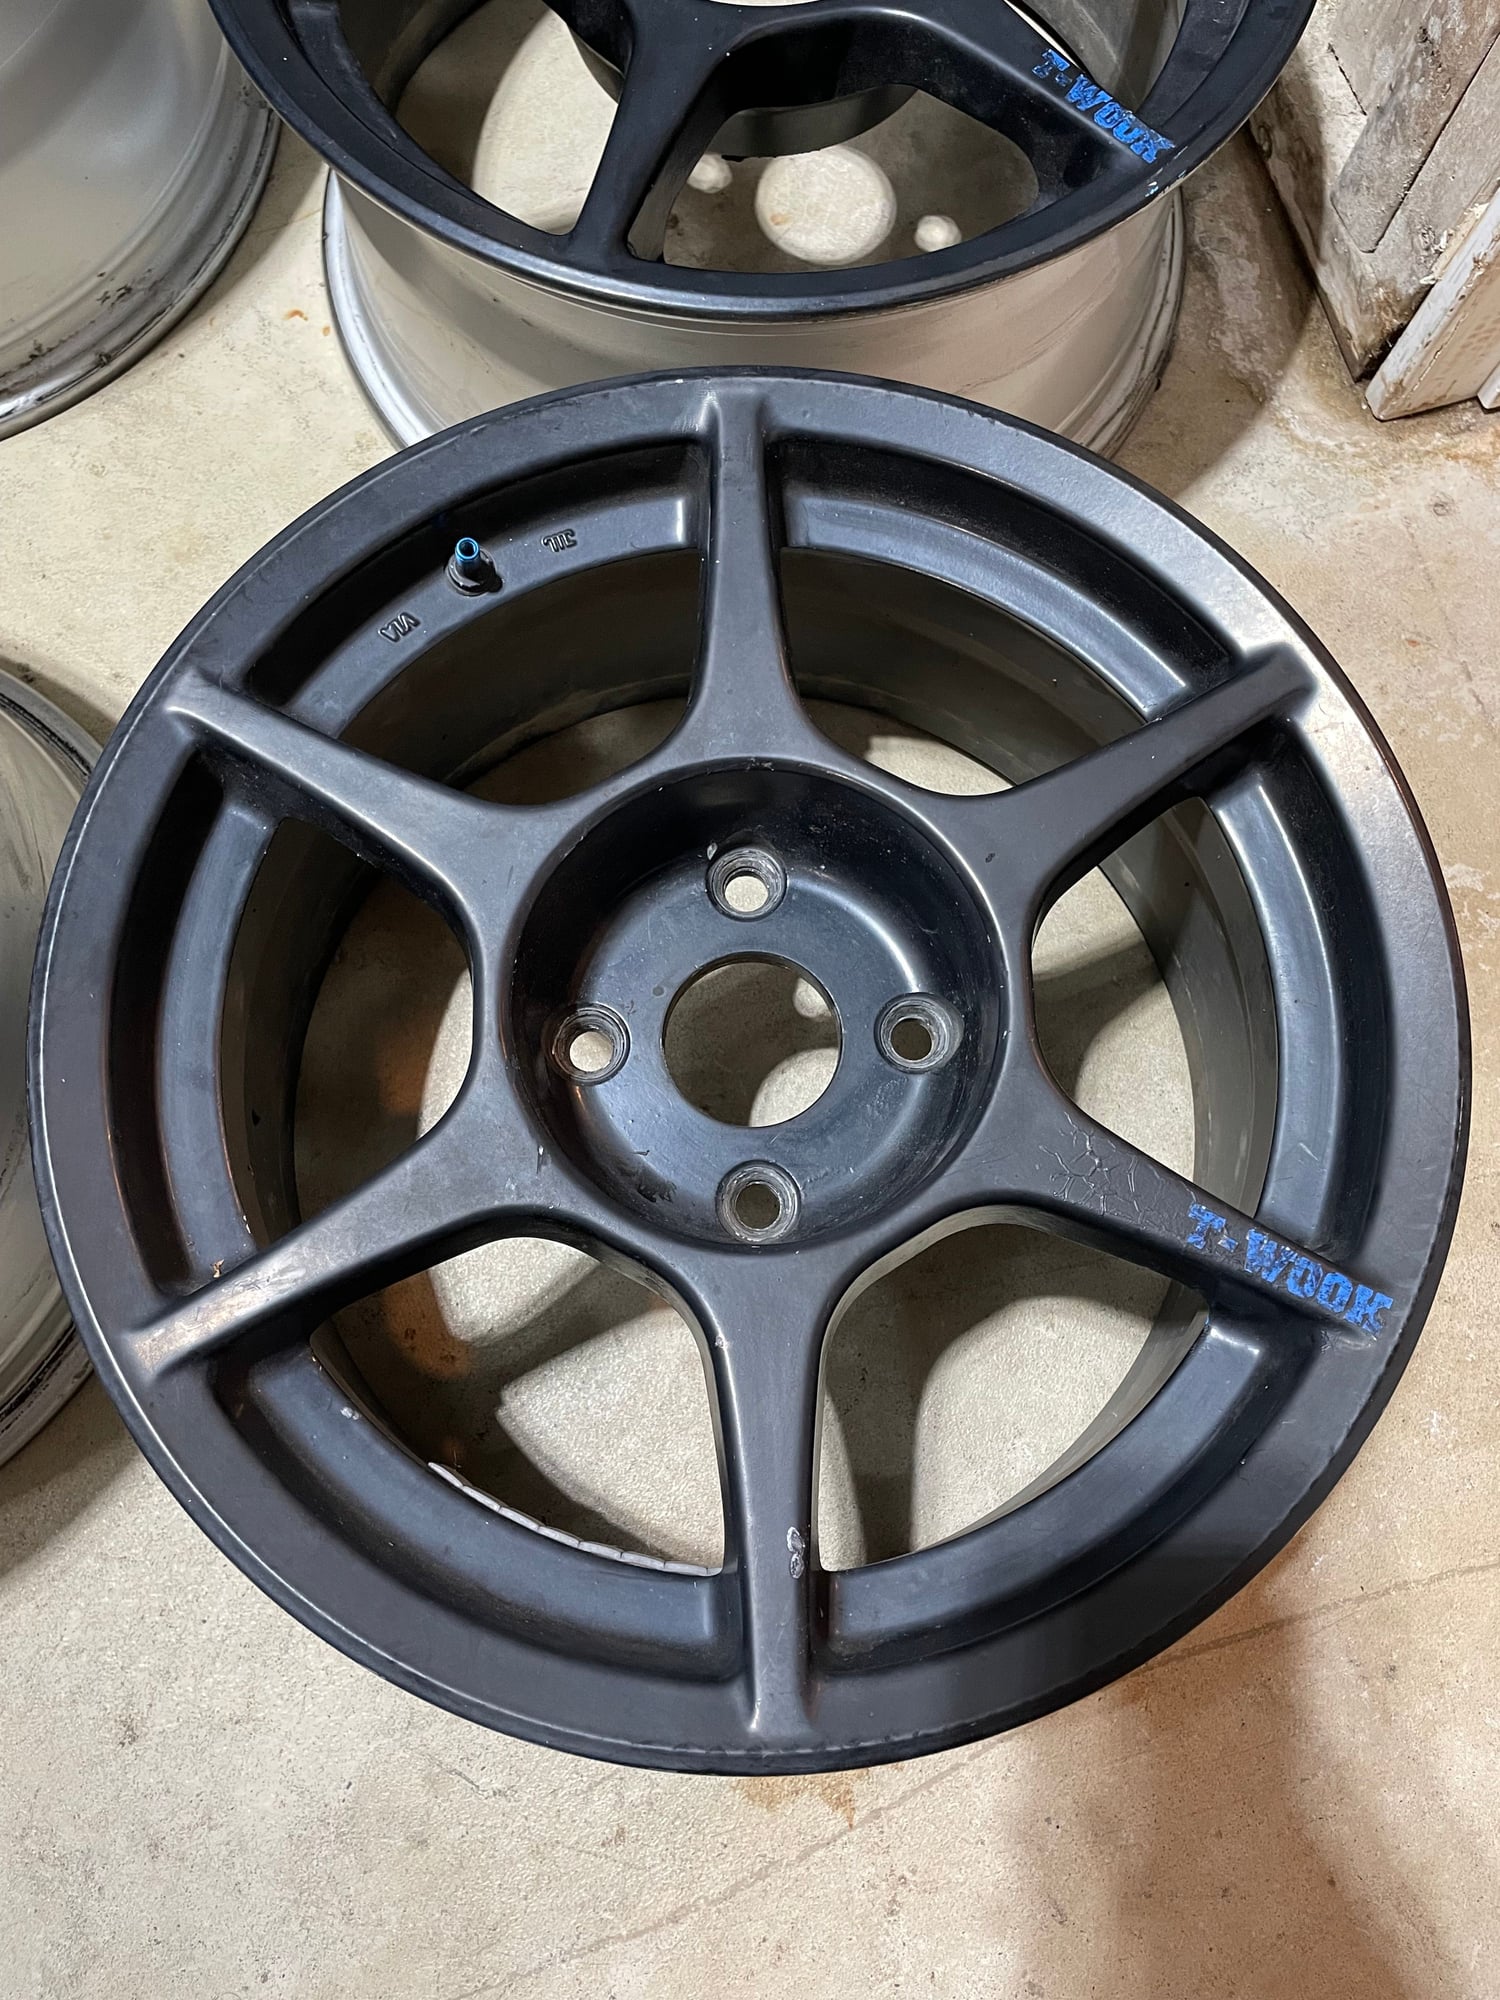 Wheels and Tires/Axles - Kosei K1 4X110 15X7 et17 - Used - 1978 to 1985 Mazda RX-7 - Minot, ND 58703, United States